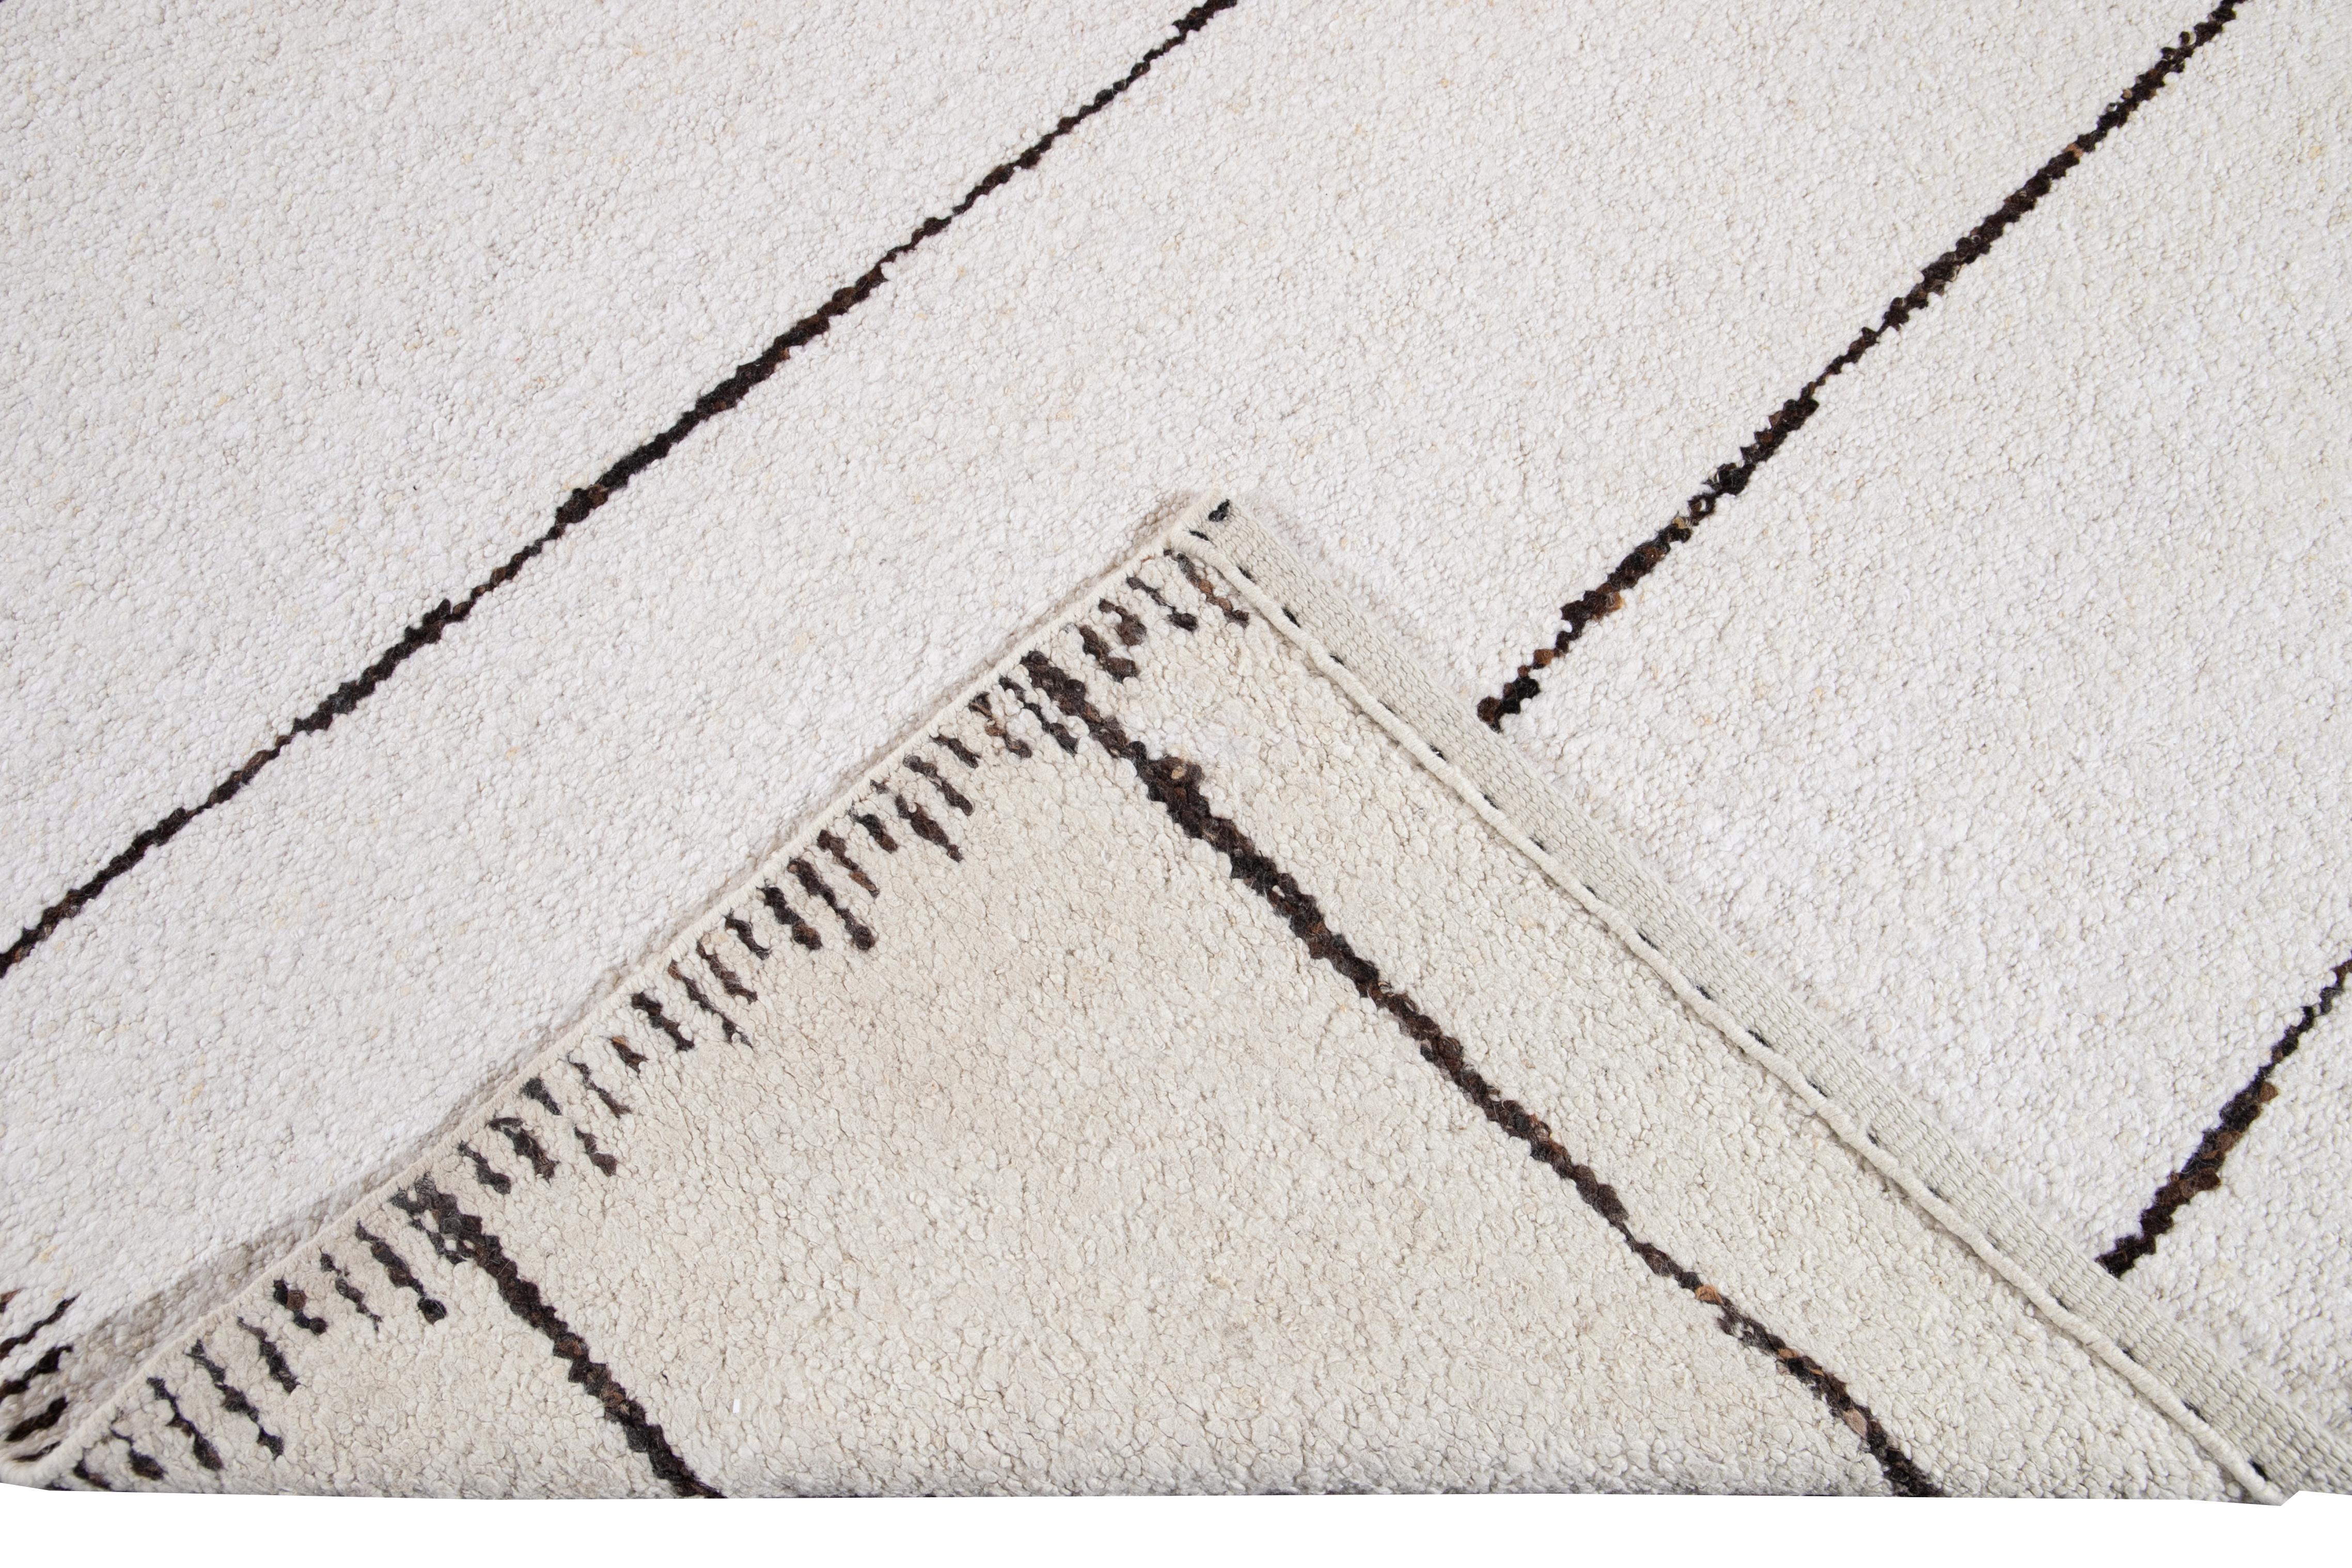 Beautiful Moroccan, style handmade wool rug with a white field. This Moroccan rug has accents in brown in a gorgeous all-over geometric striped design.

This rug measures: 12'5